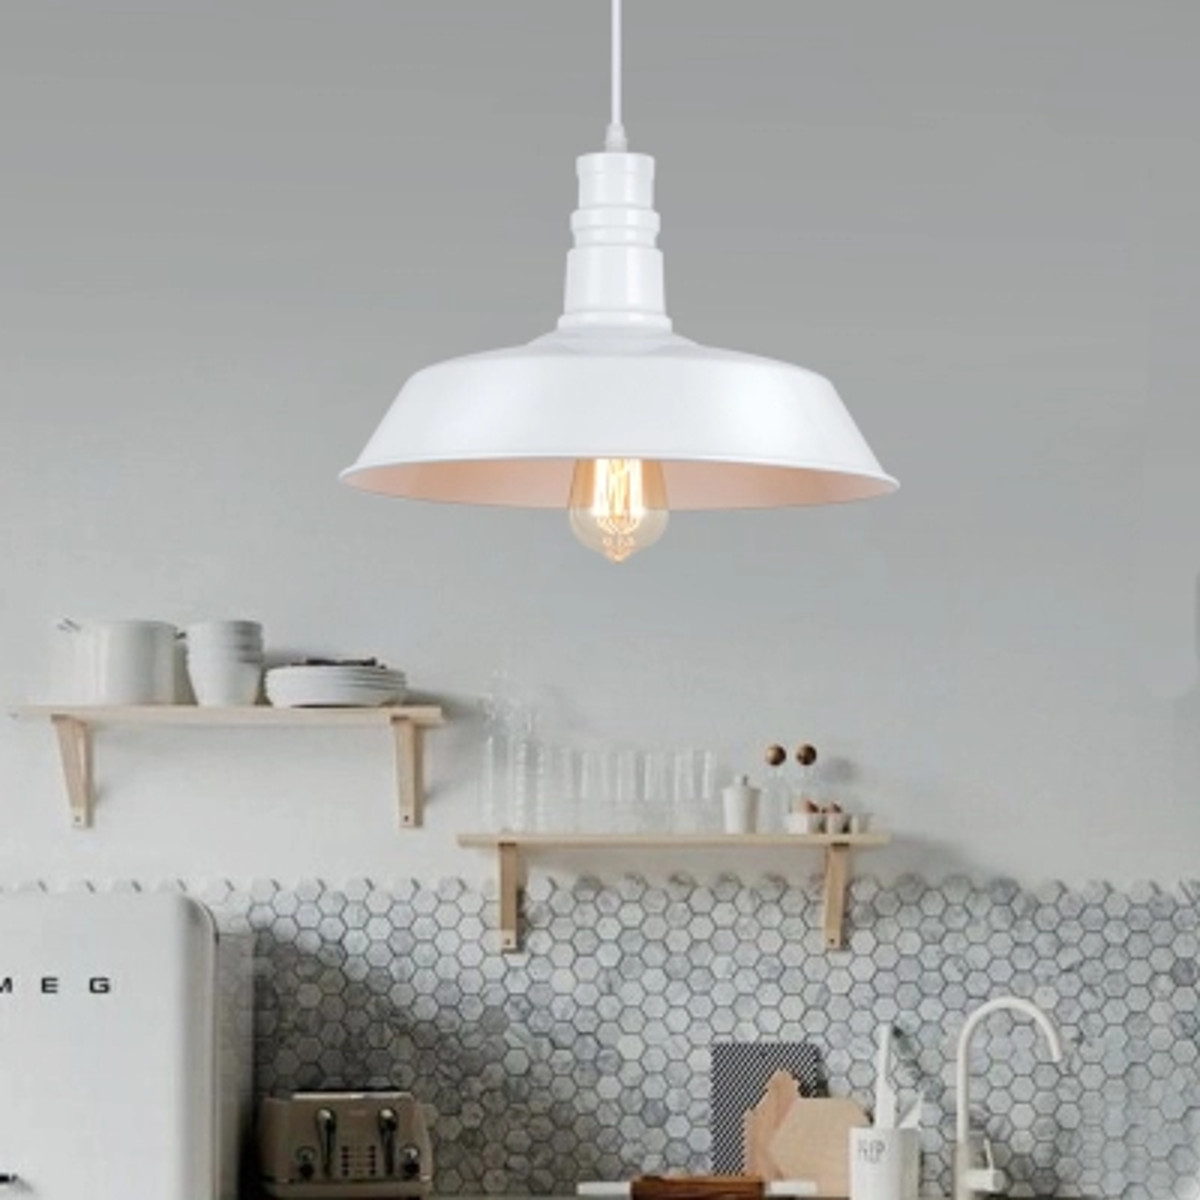 Modern-Industrial-Metal-Style-Ceiling-Pendant-Light-Lamp-Shades-Lampshade-Decor-1349402-6